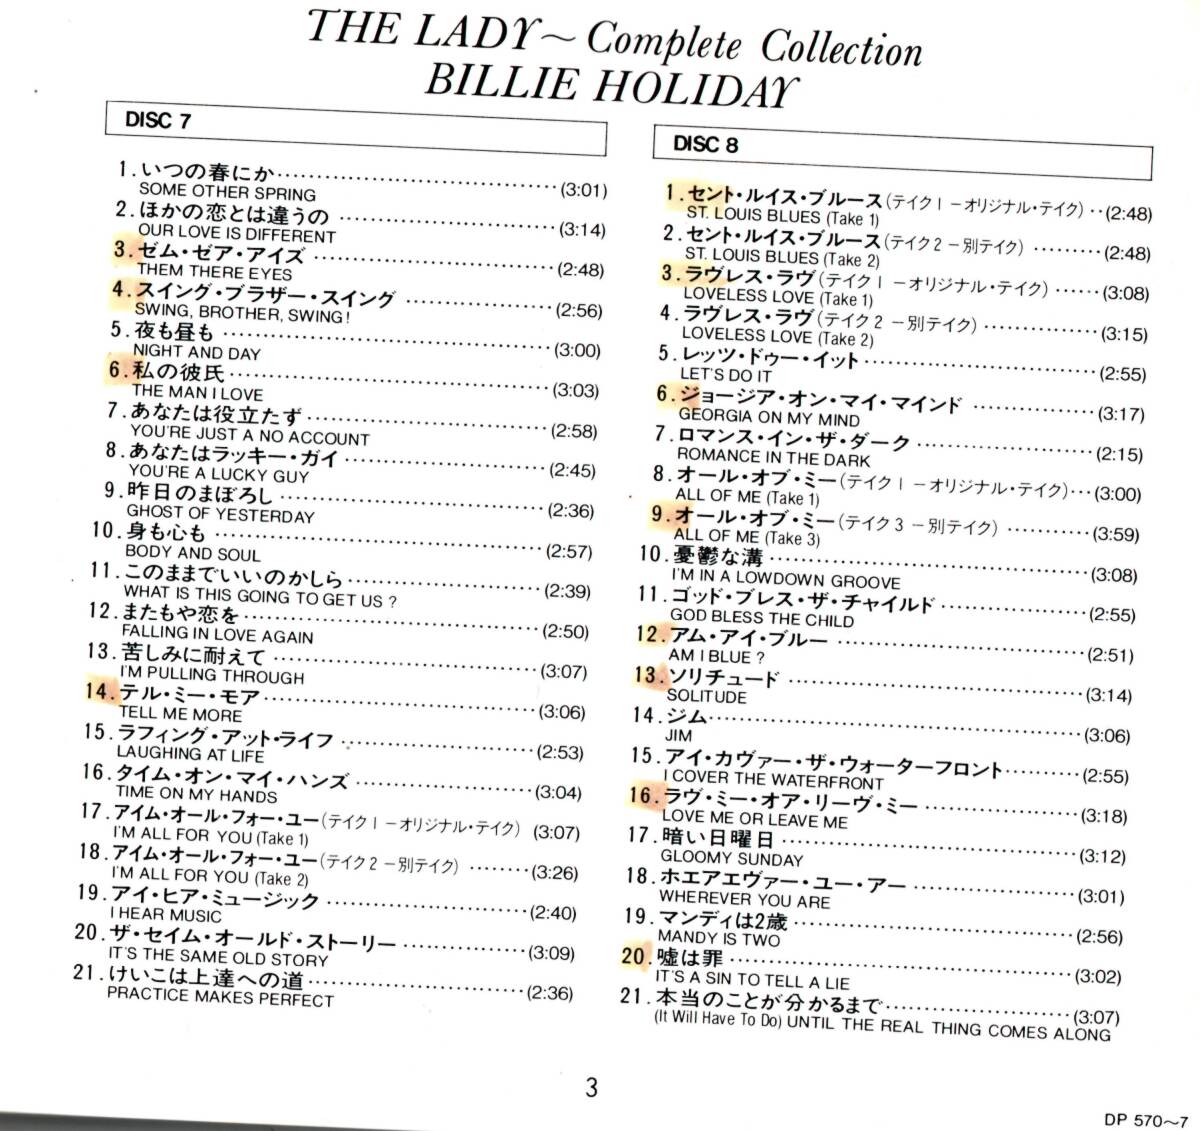 CD ジャズ・限定盤●Billie Holiday／The Lady Complete Collection（ボックスセット）_画像8